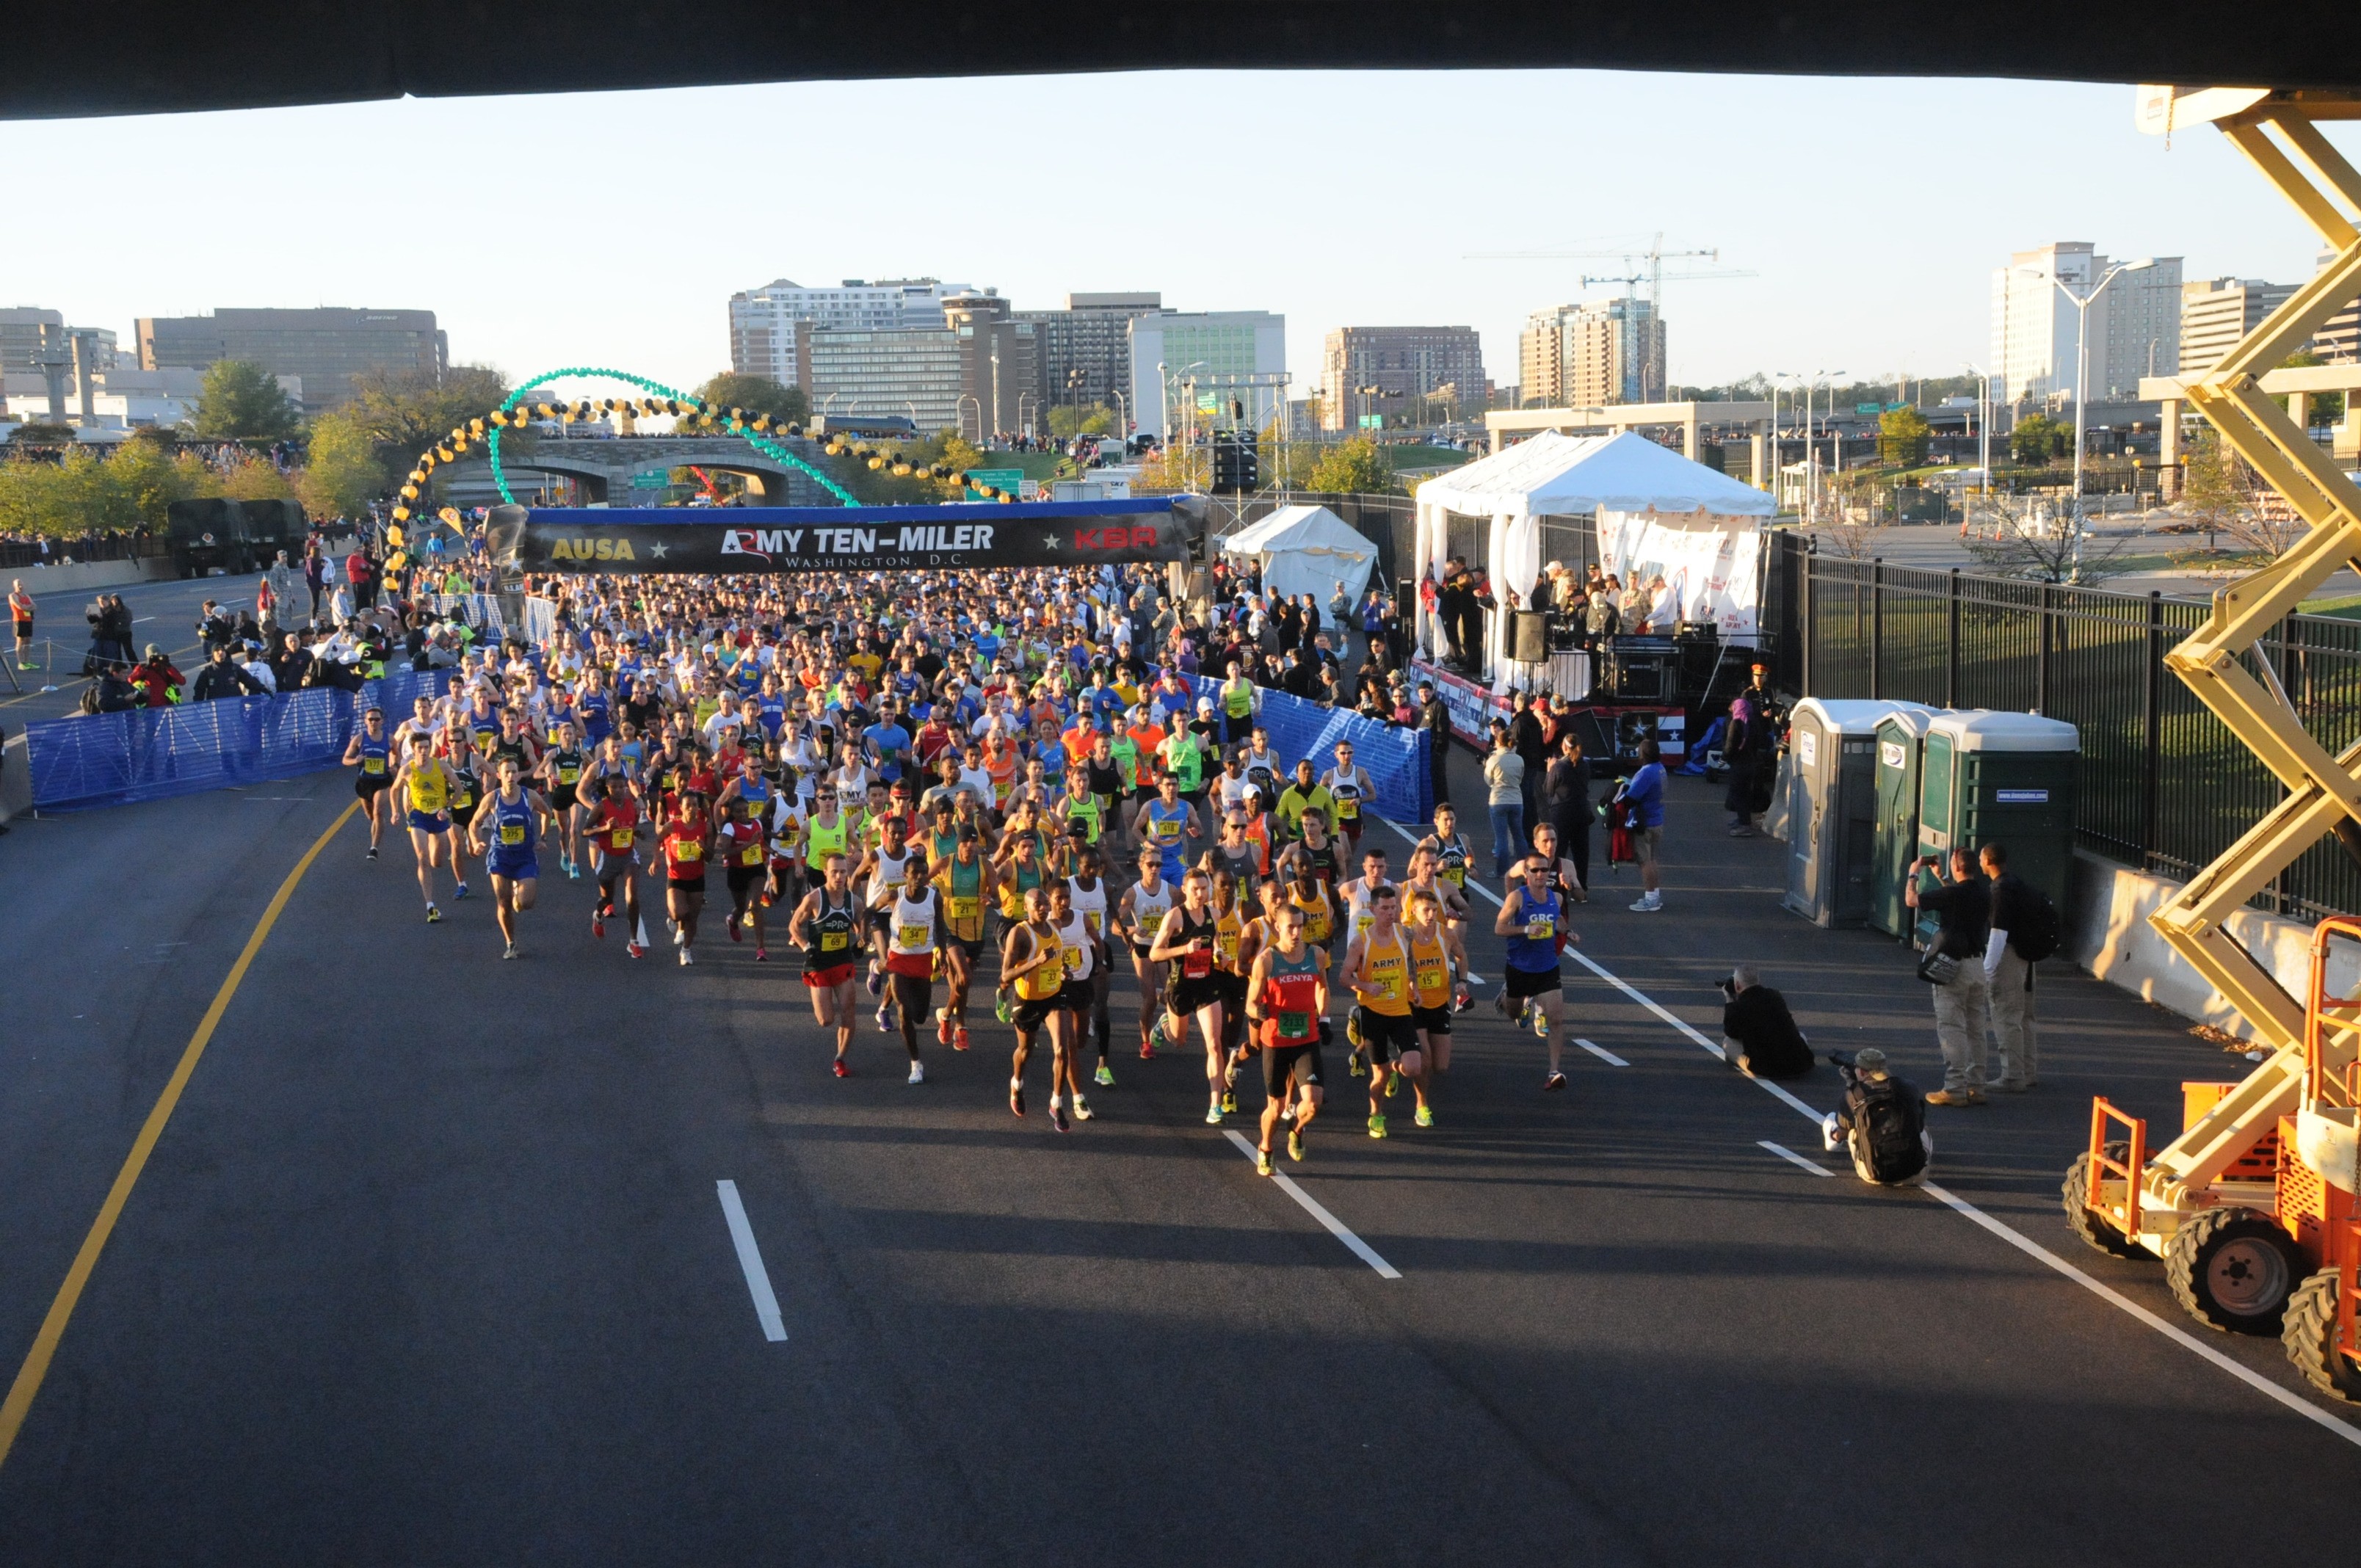 Army TenMiler race produces 35,000 winners! Article The United